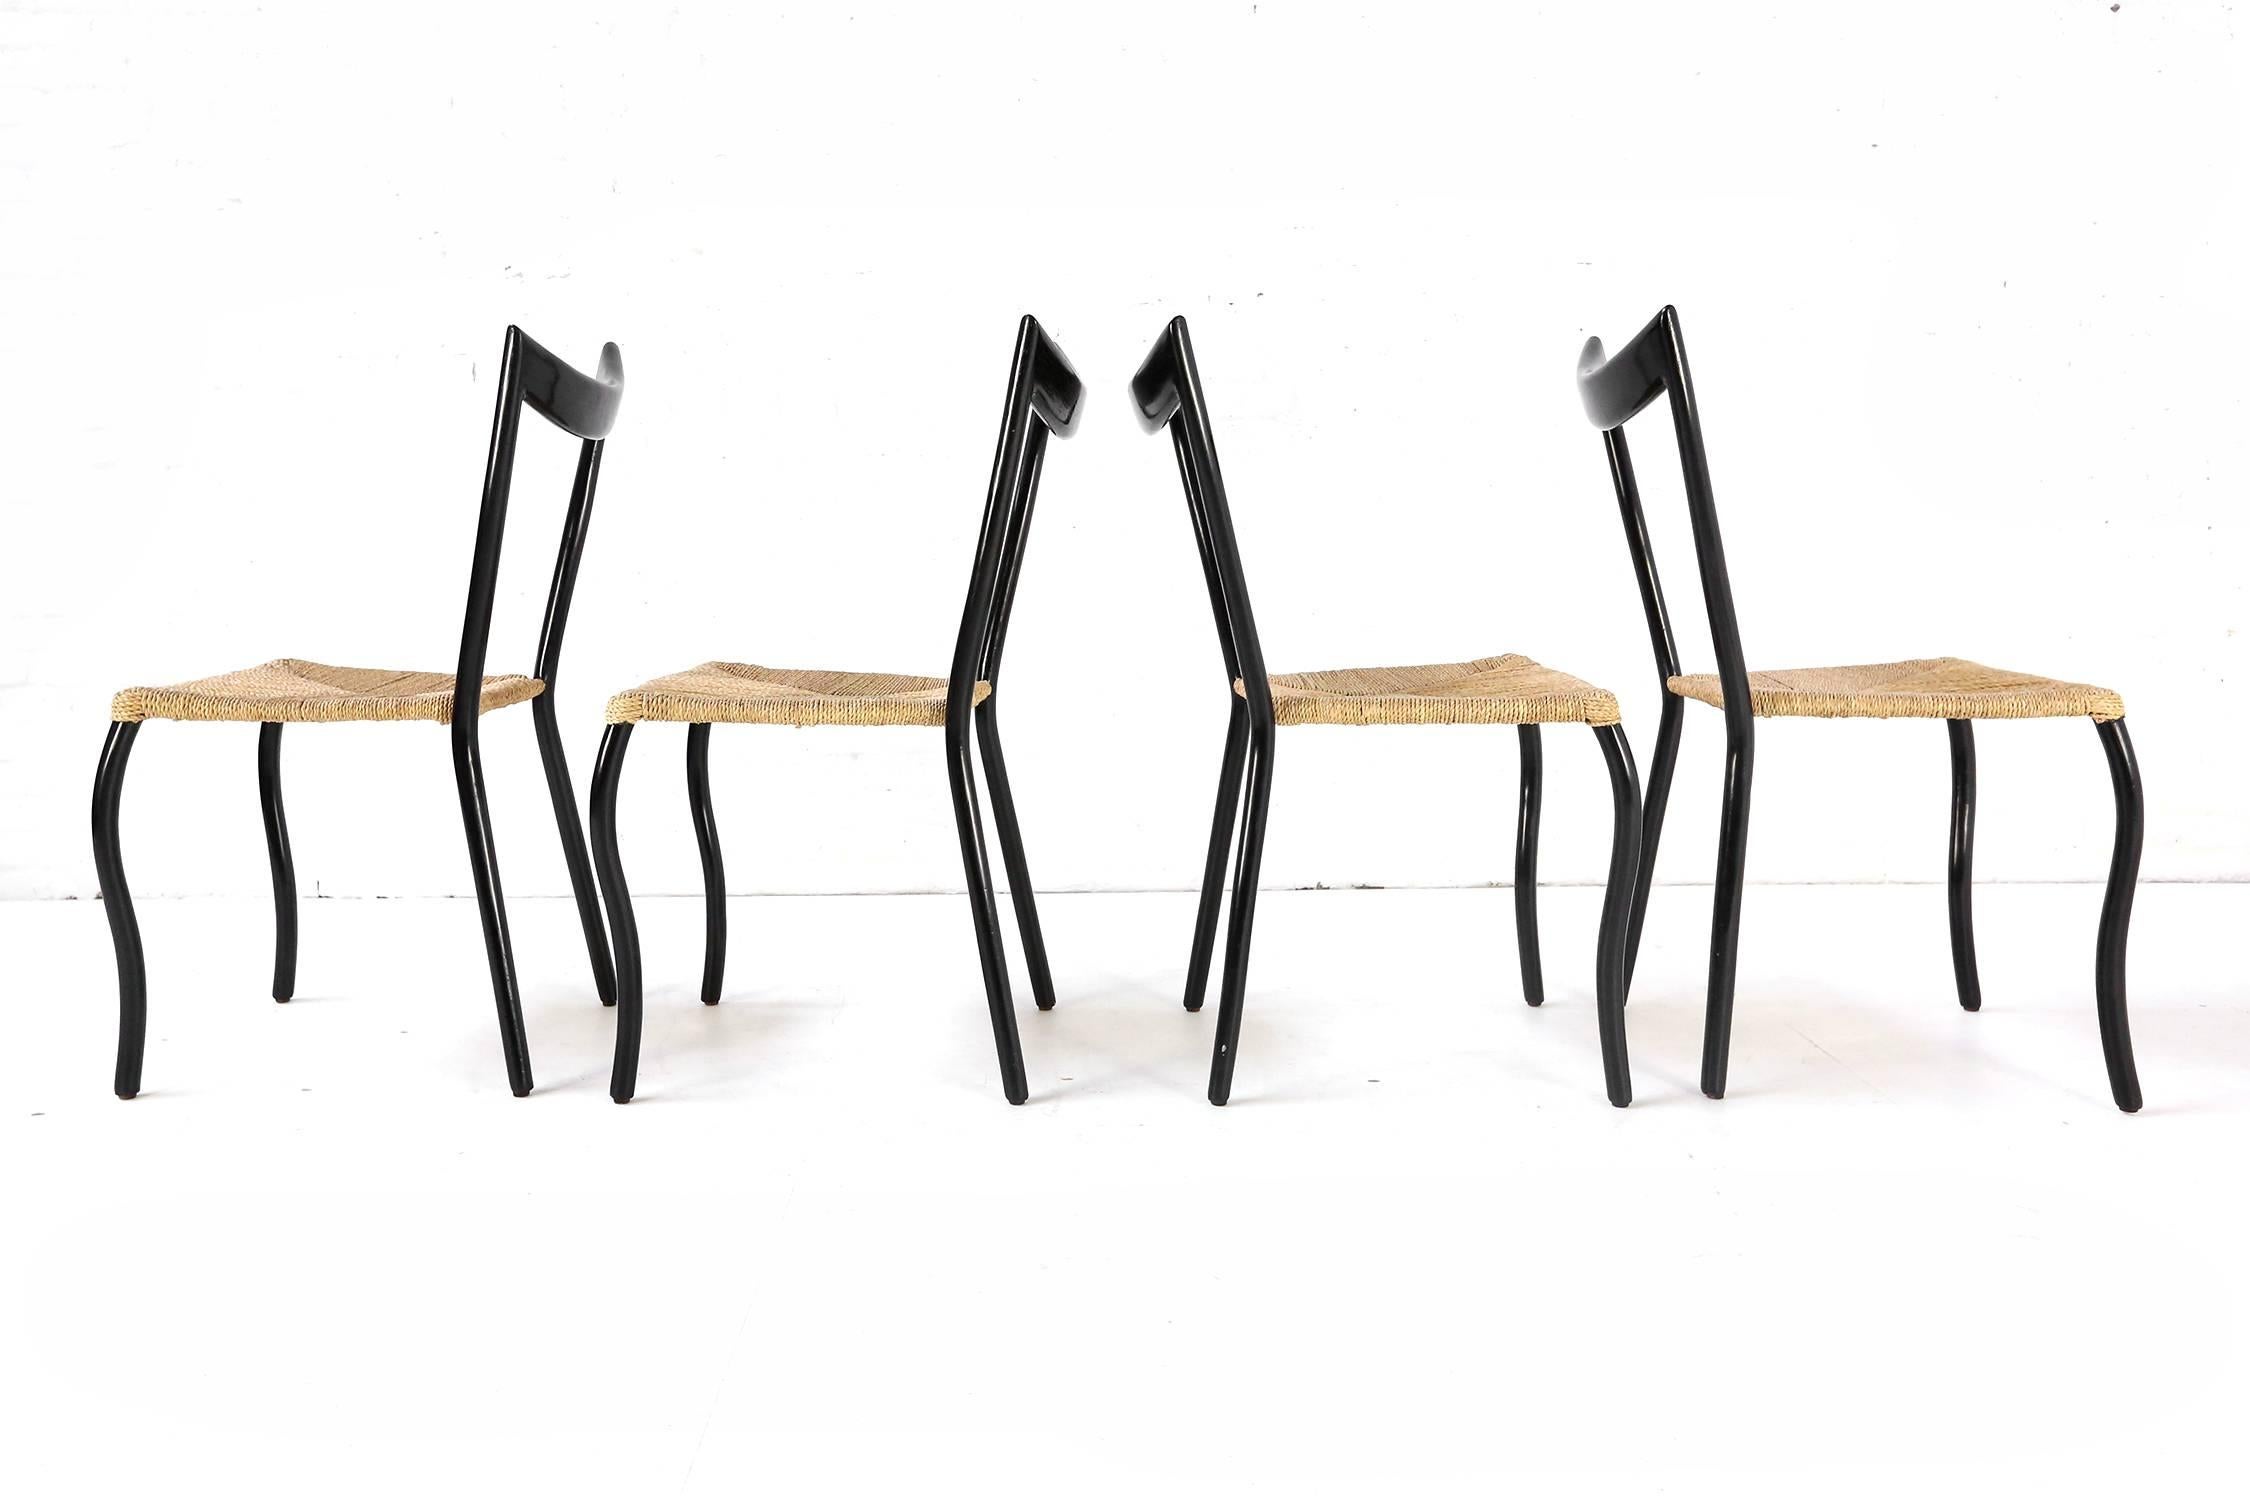 A striking set of ebonized bentwood dining chairs in the distinct style and manner of Gio Ponti. Attention to detail and smart design are obviously hallmarks of these beautifully made chairs. Rush is in good condition throughout. Chairs are tight